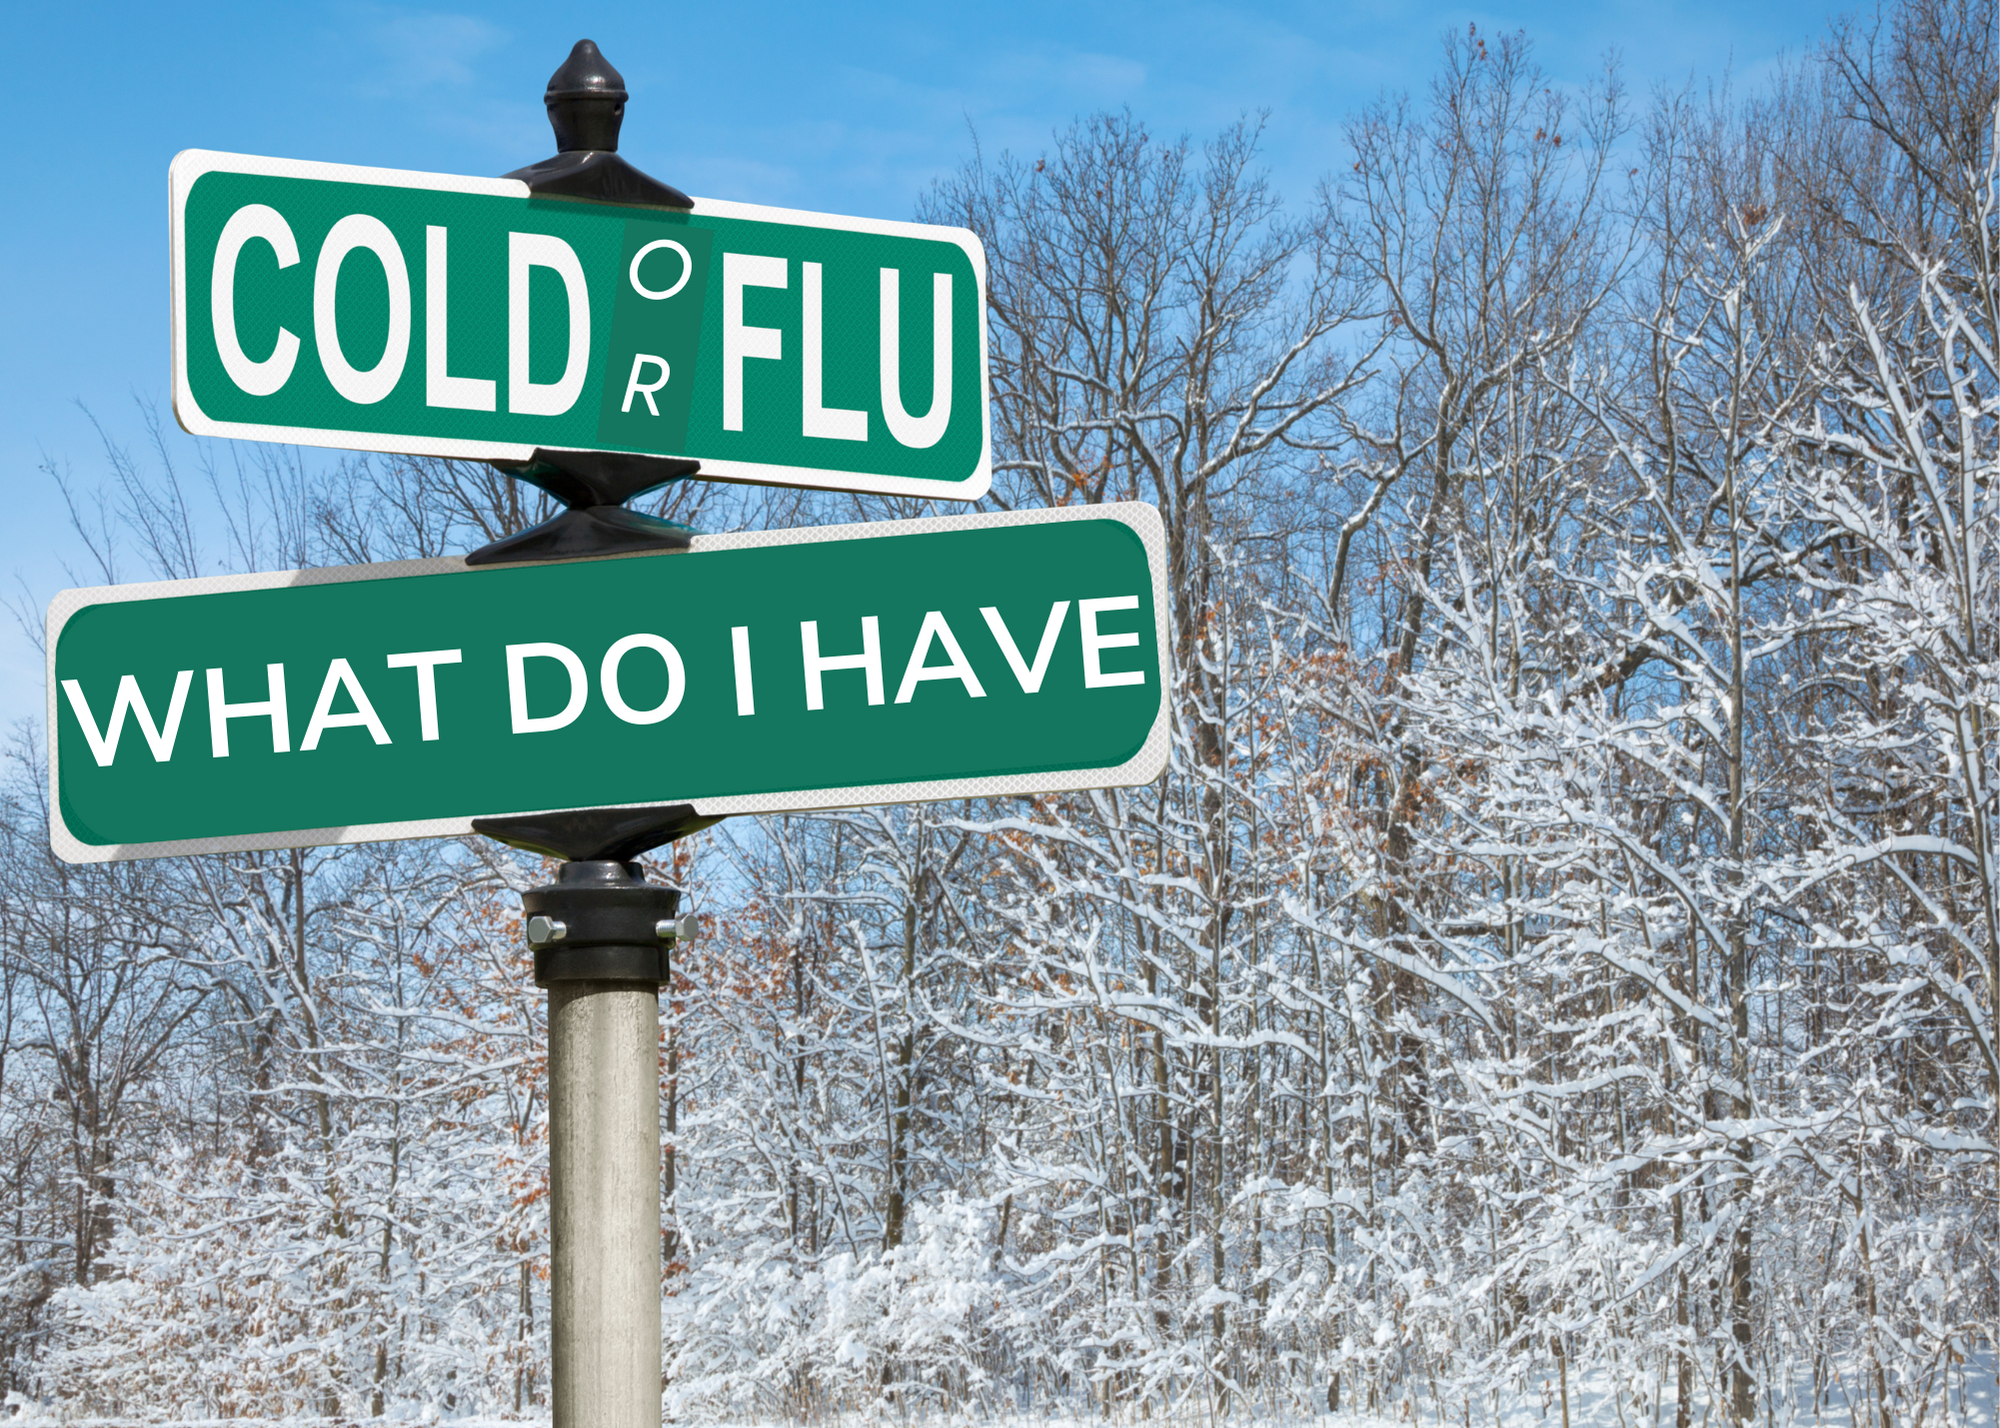 What Do I Have - Cold or Flu?